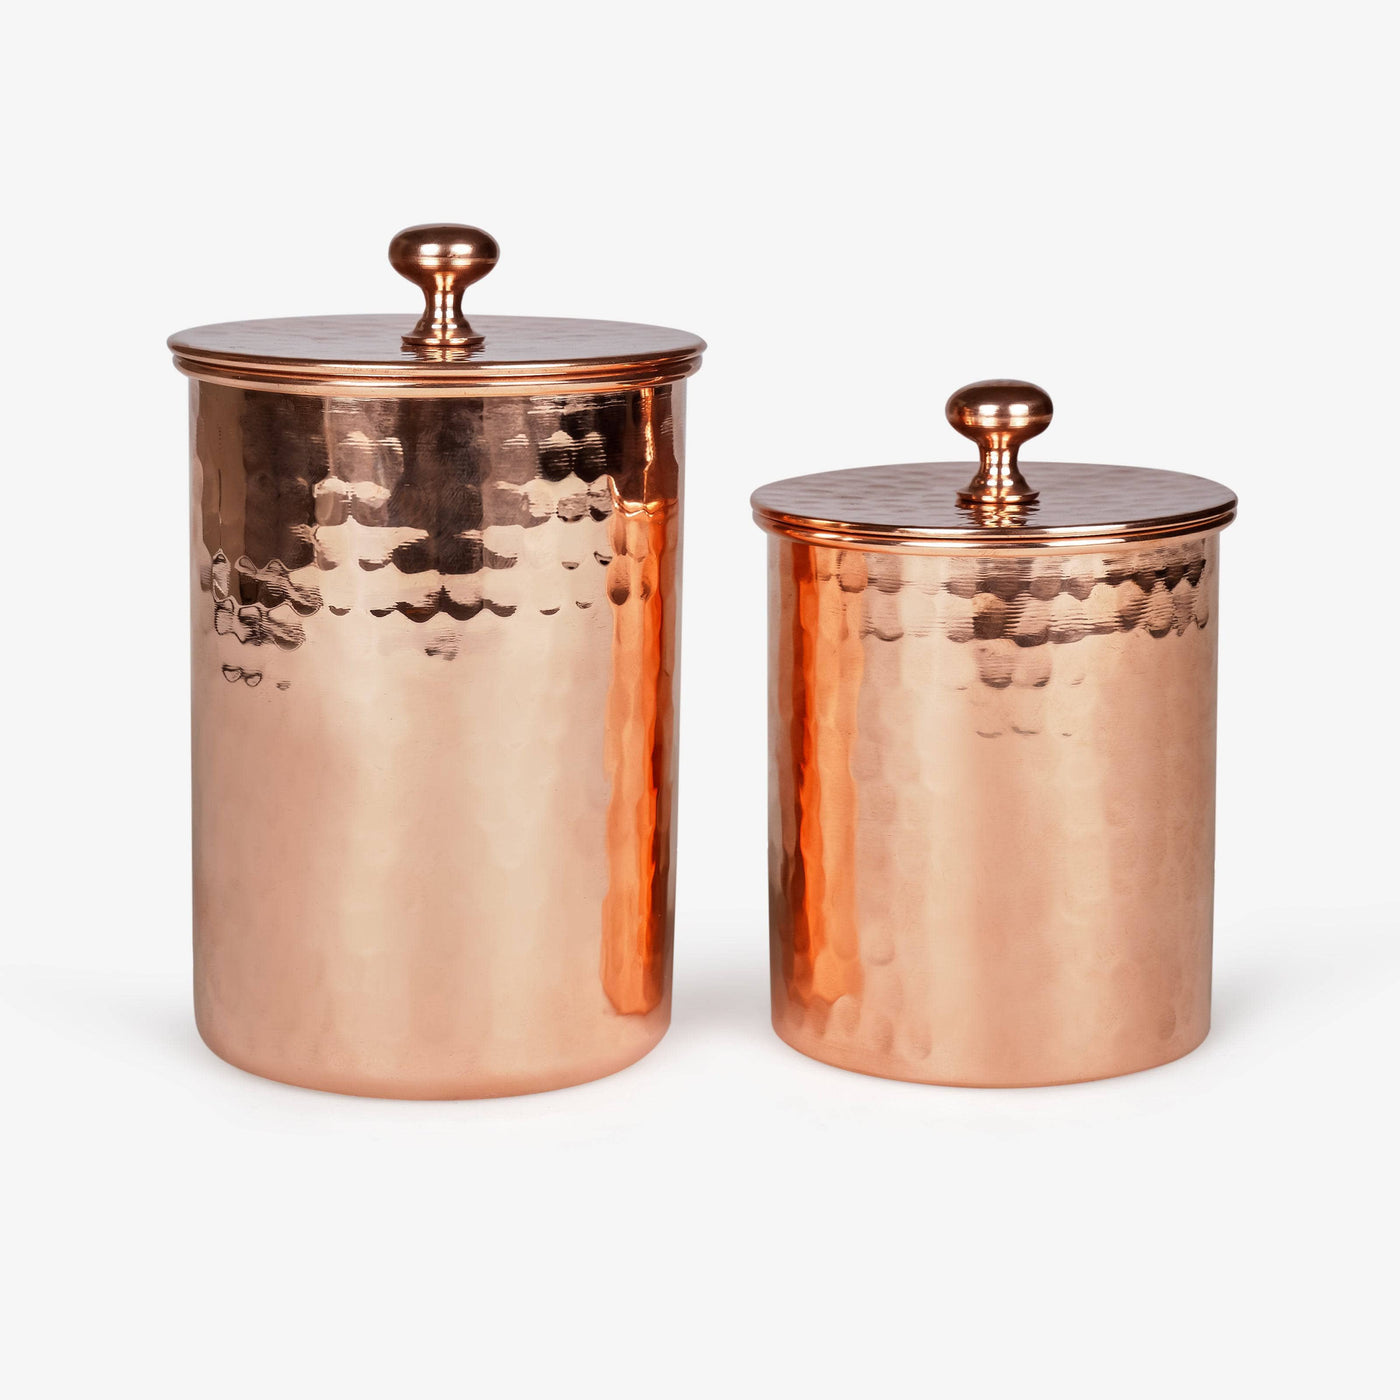 Penny Hammered Copper Spice Jar, Copper, 8.5x8.5x12.5 cm 3